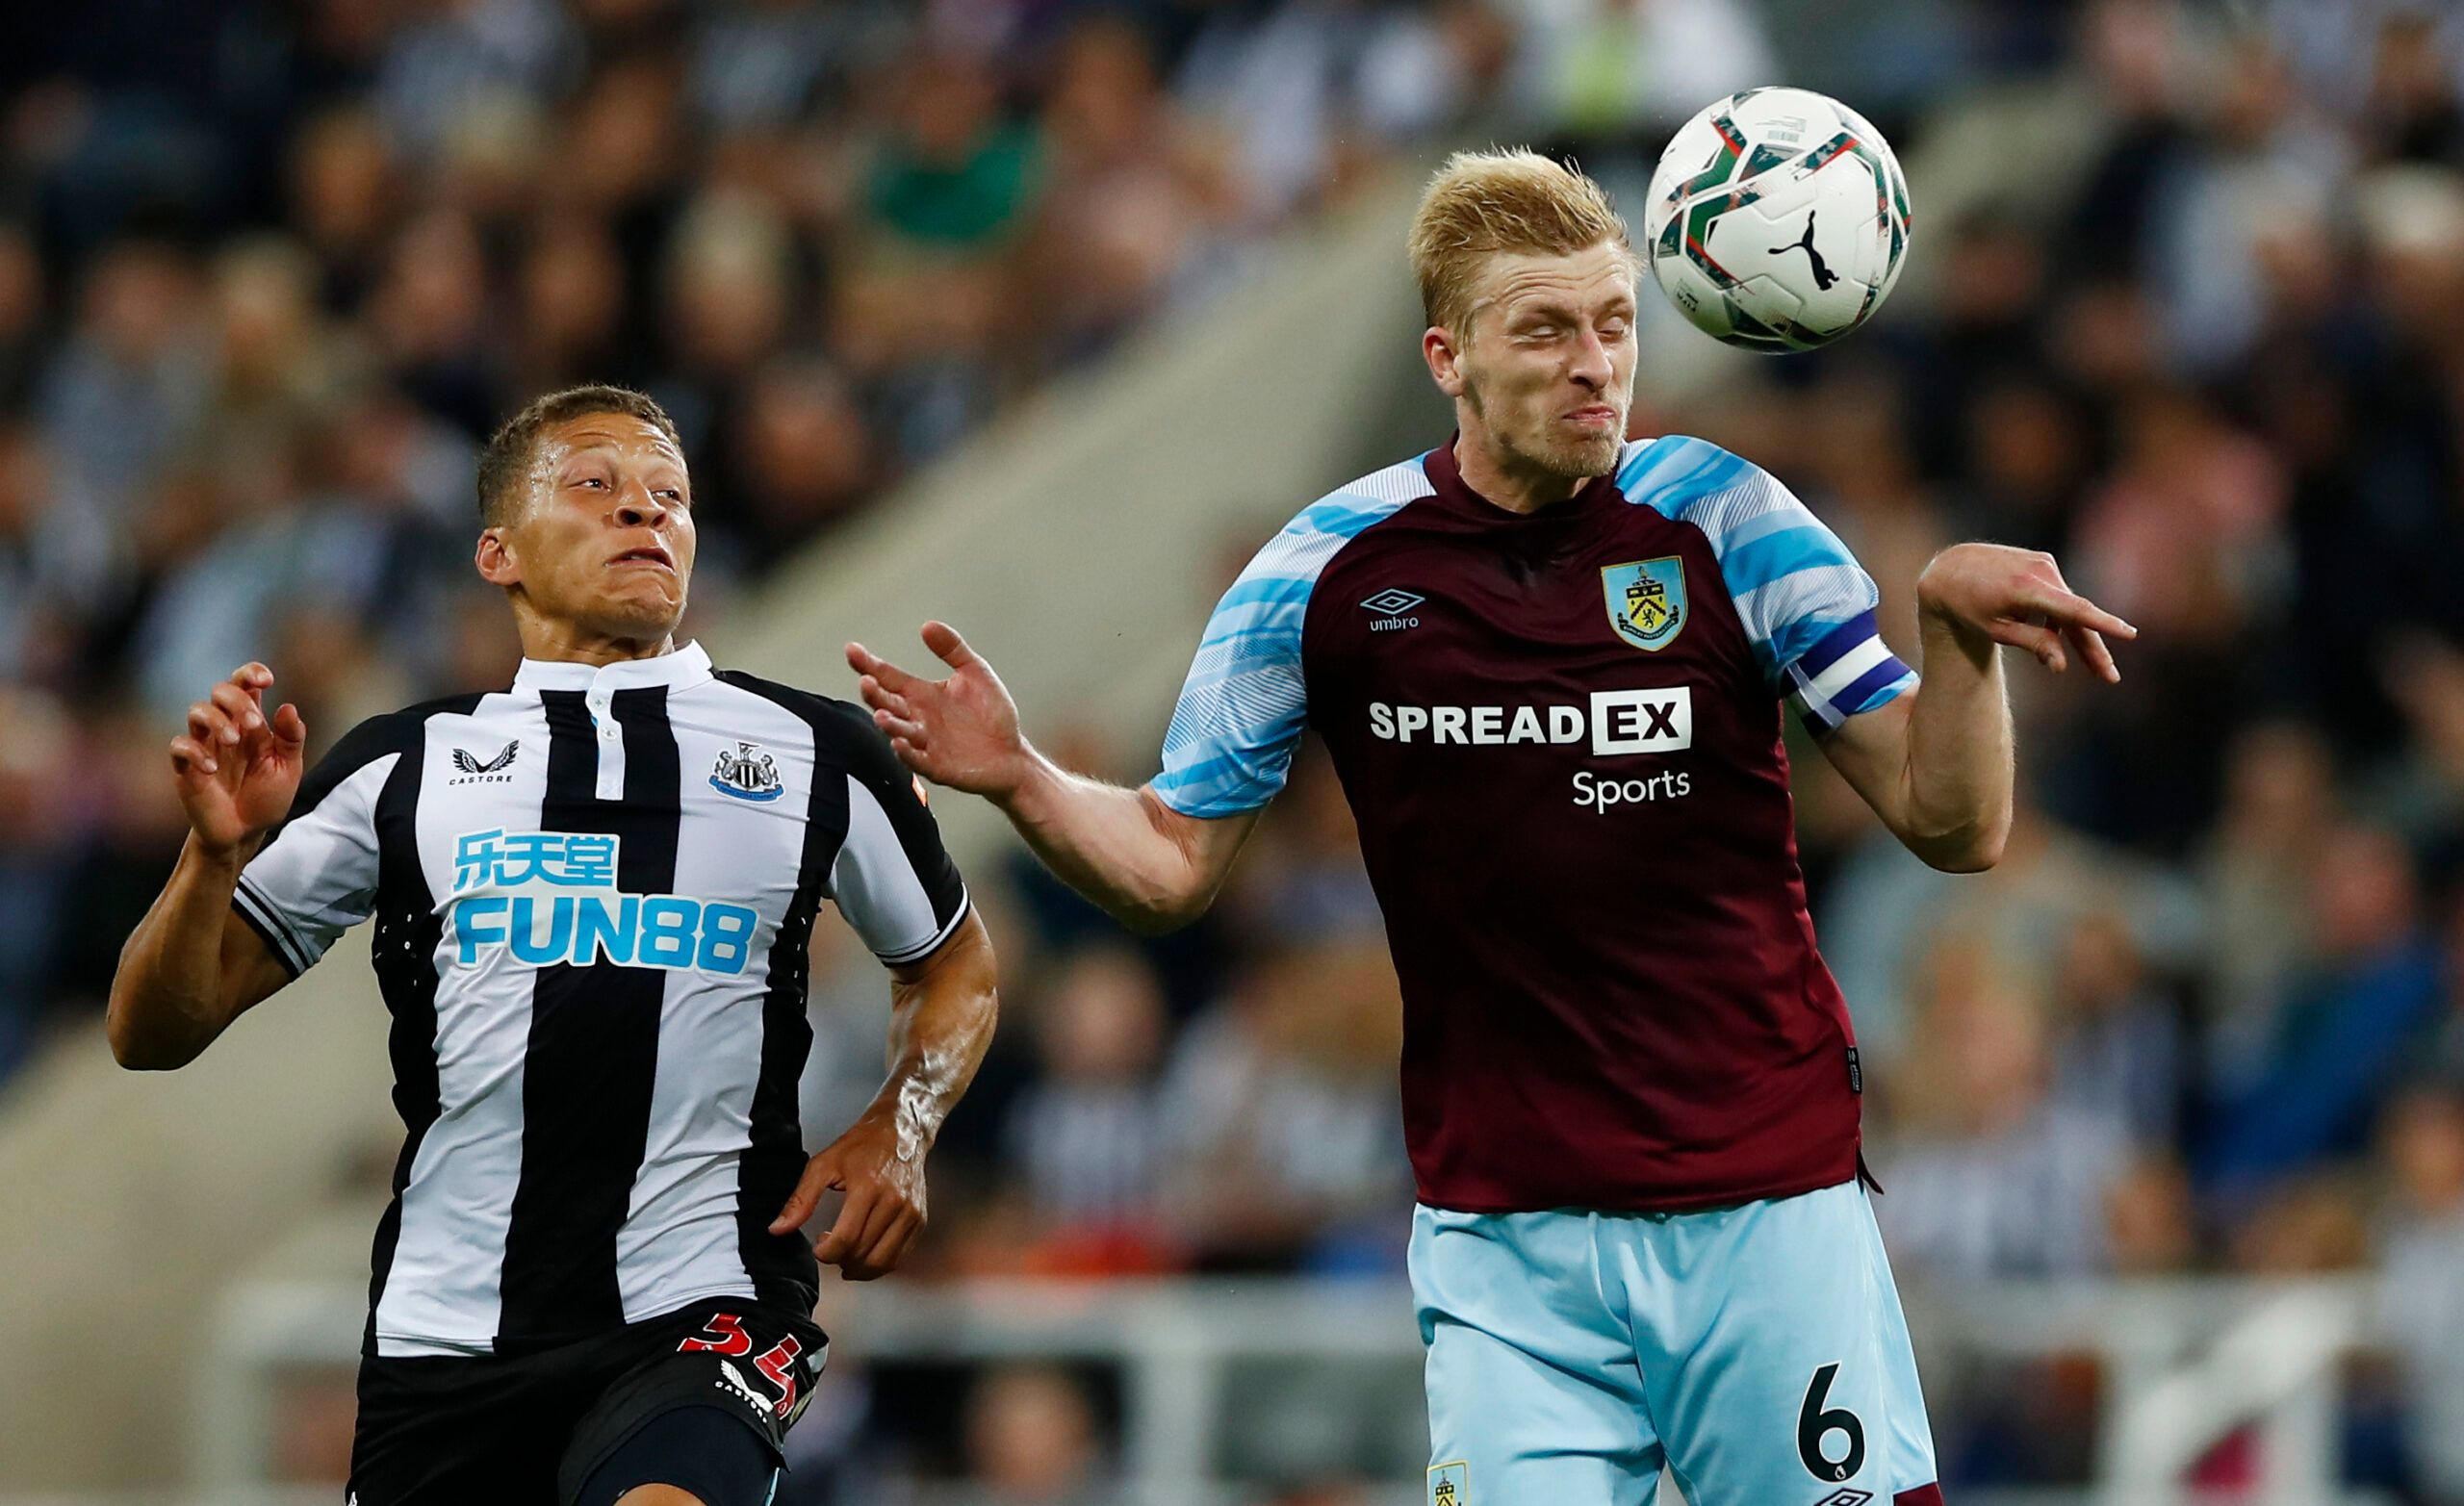 Soccer Football - Carabao Cup - Second Round - Newcastle United v Burnley - St James' Park, Newcastle, Britain - August 25, 2021 Newcastle United's Dwight Gayle in action with Burnley's Ben Mee Action Images via Reuters/Jason Cairnduff EDITORIAL USE ONLY. No use with unauthorized audio, video, data, fixture lists, club/league logos or 'live' services. Online in-match use limited to 75 images, no video emulation. No use in betting, games or single club /league/player publications.  Please contact